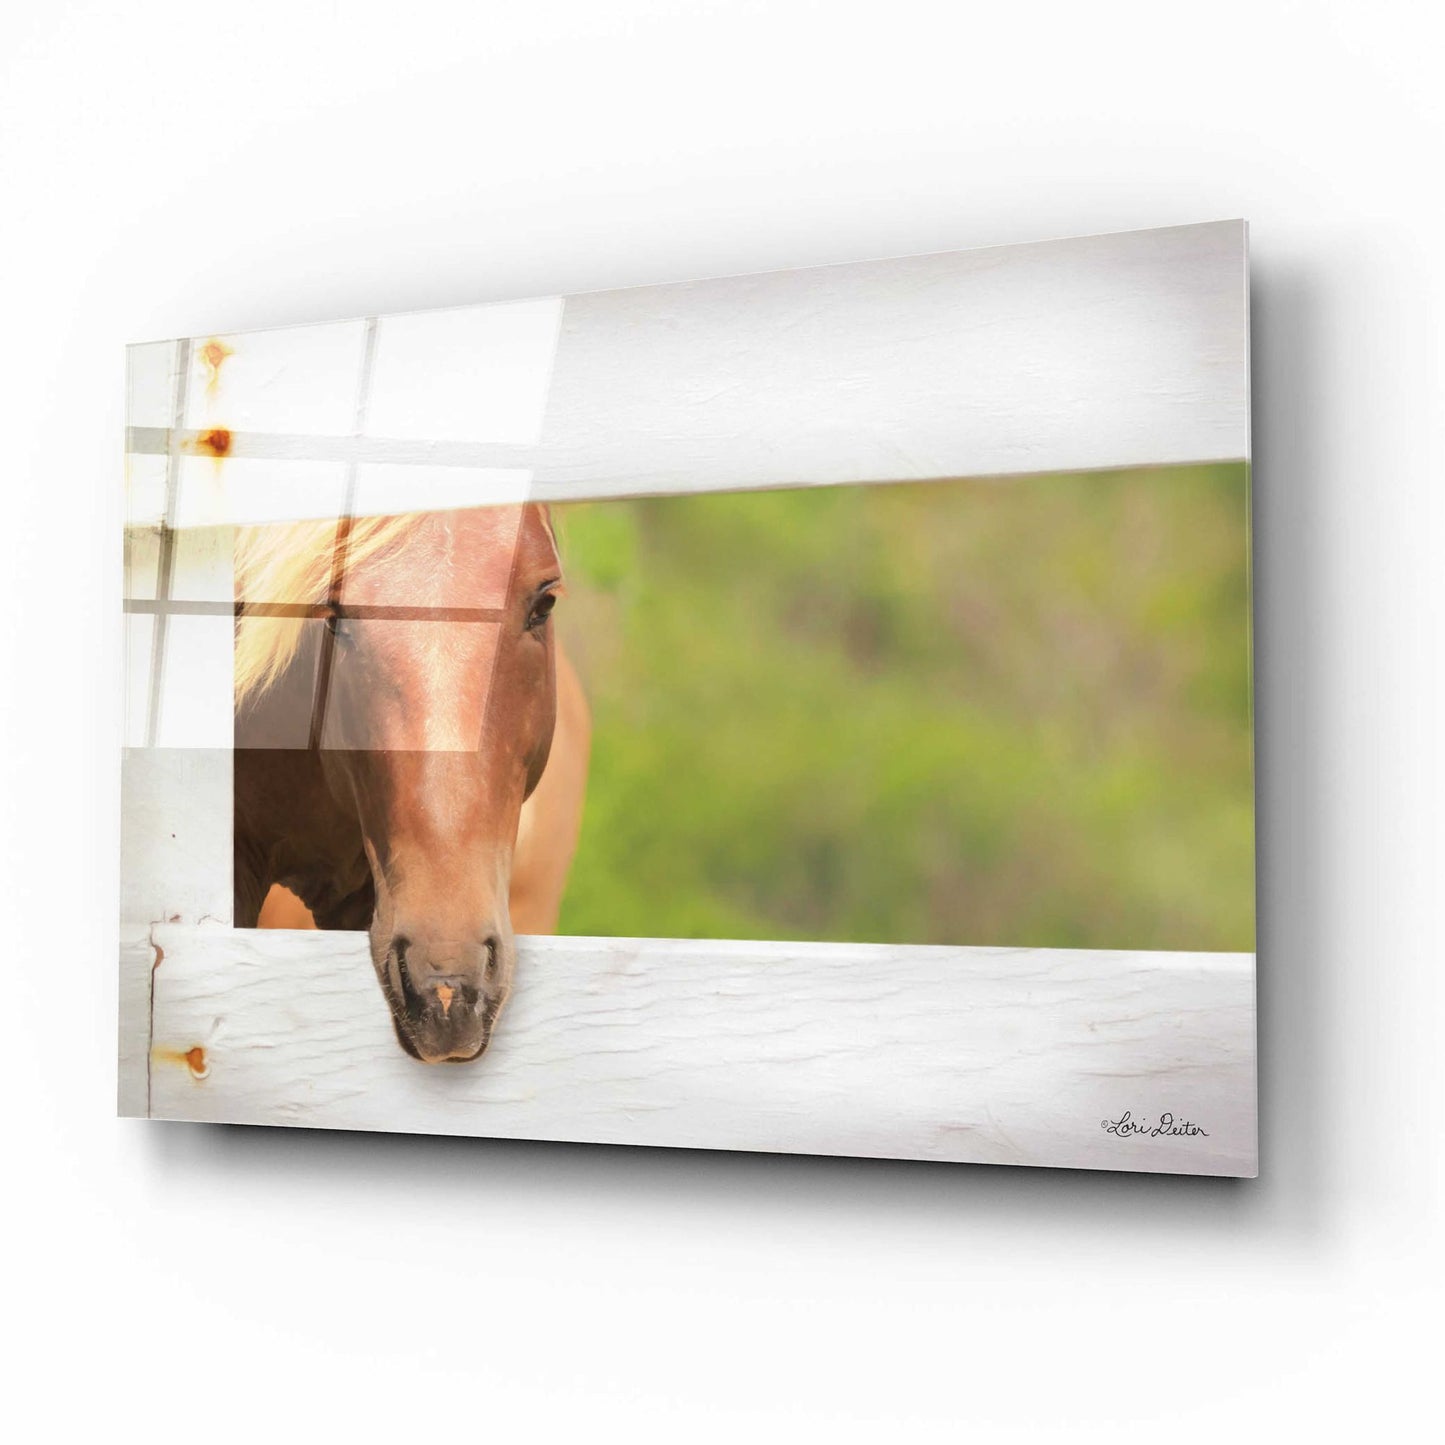 Epic Art 'Horse at Fence' by Lori Deiter Acrylic Glass Wall Art,16x12